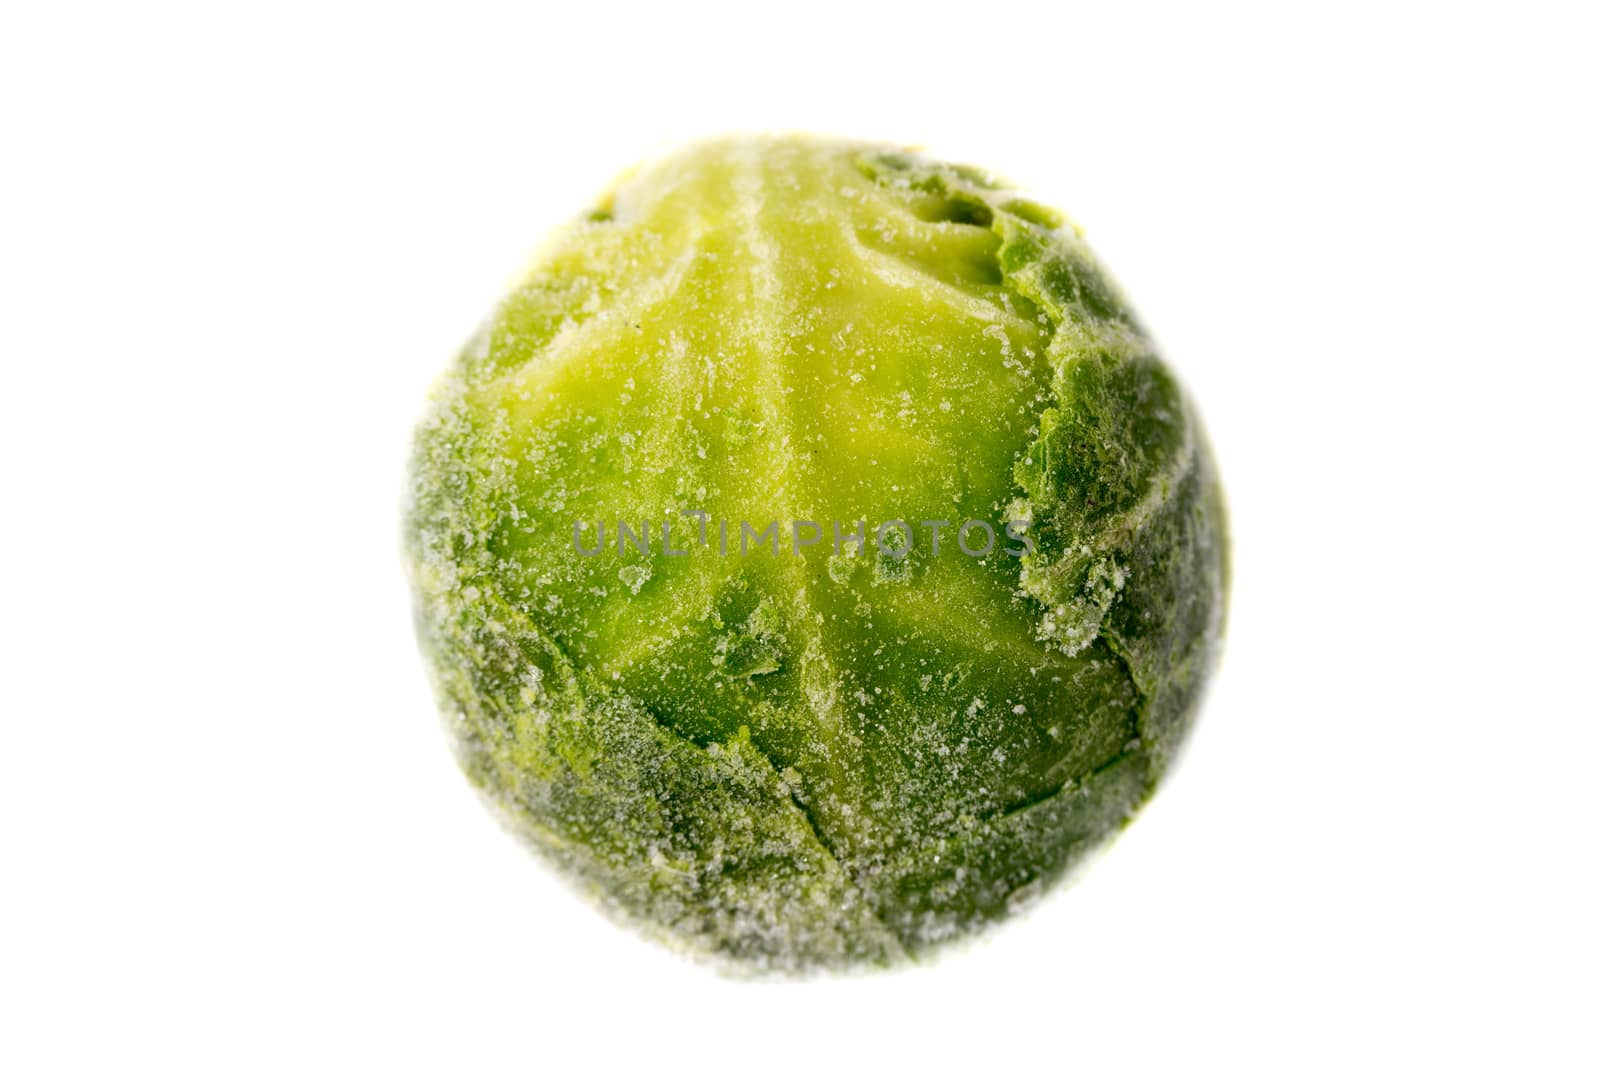 Picture of a single frozen green sprout